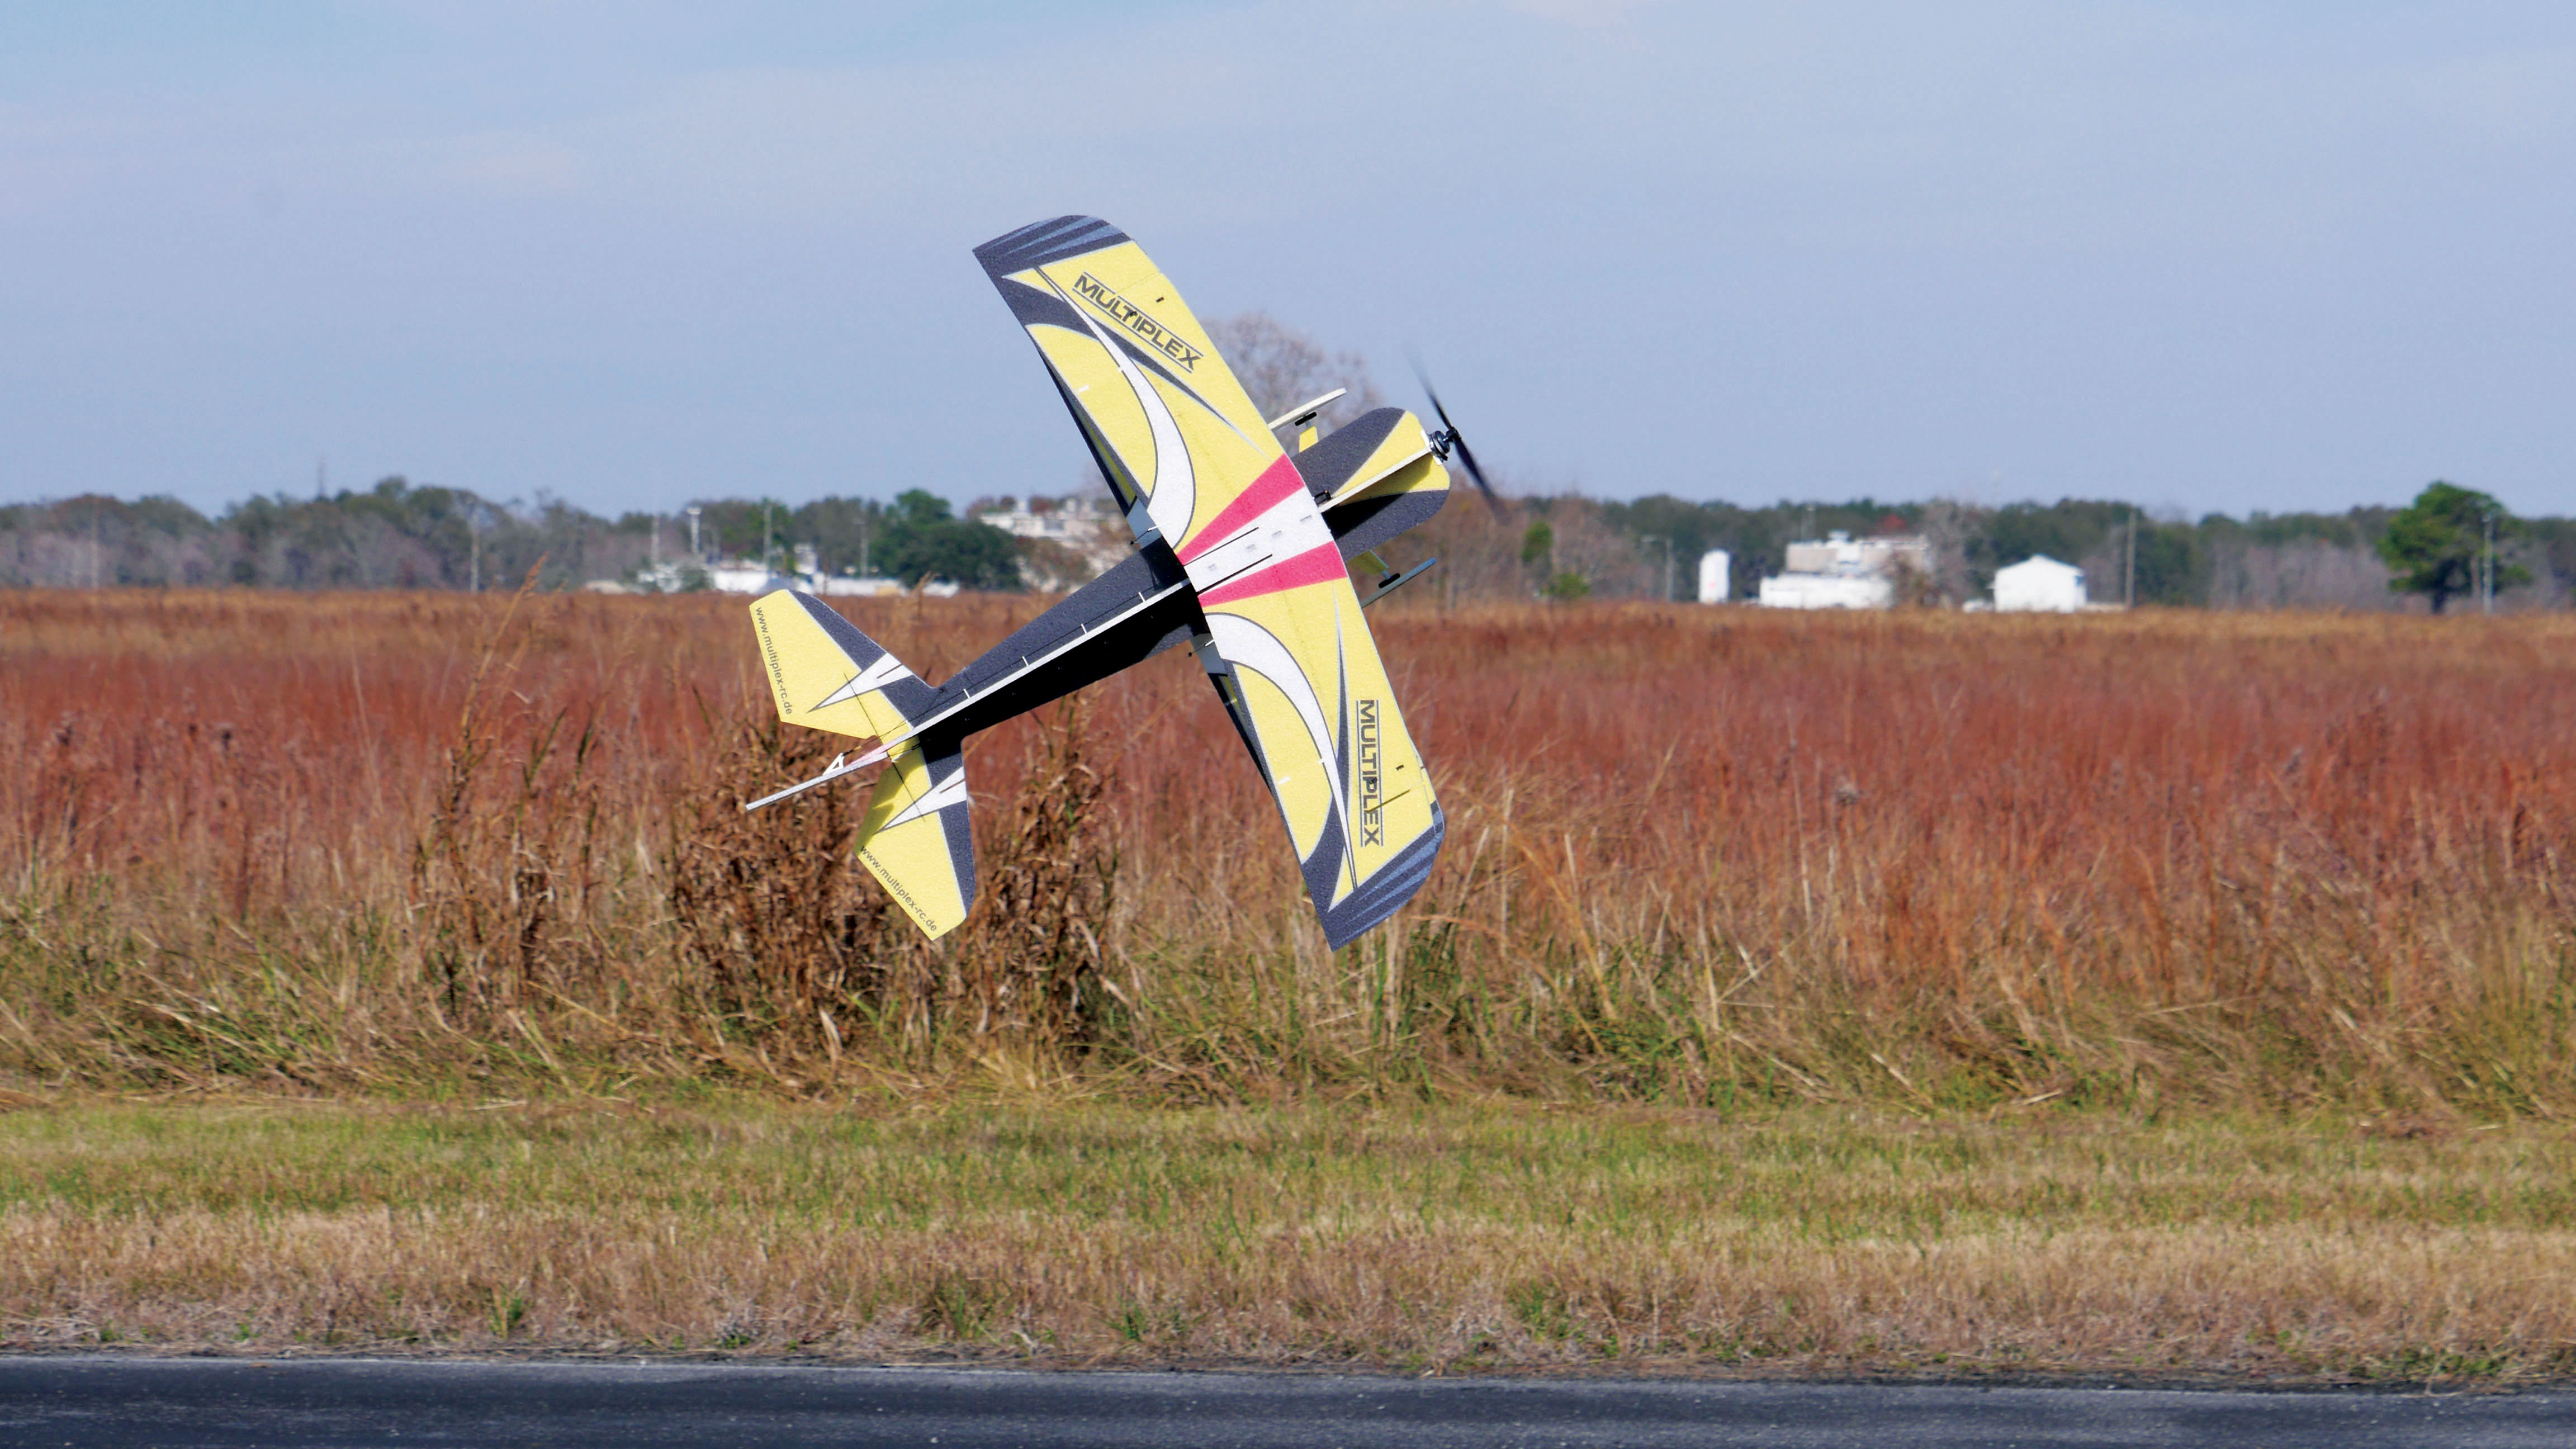 the challenger flies effortlessly and is comfortable in knife edge flight